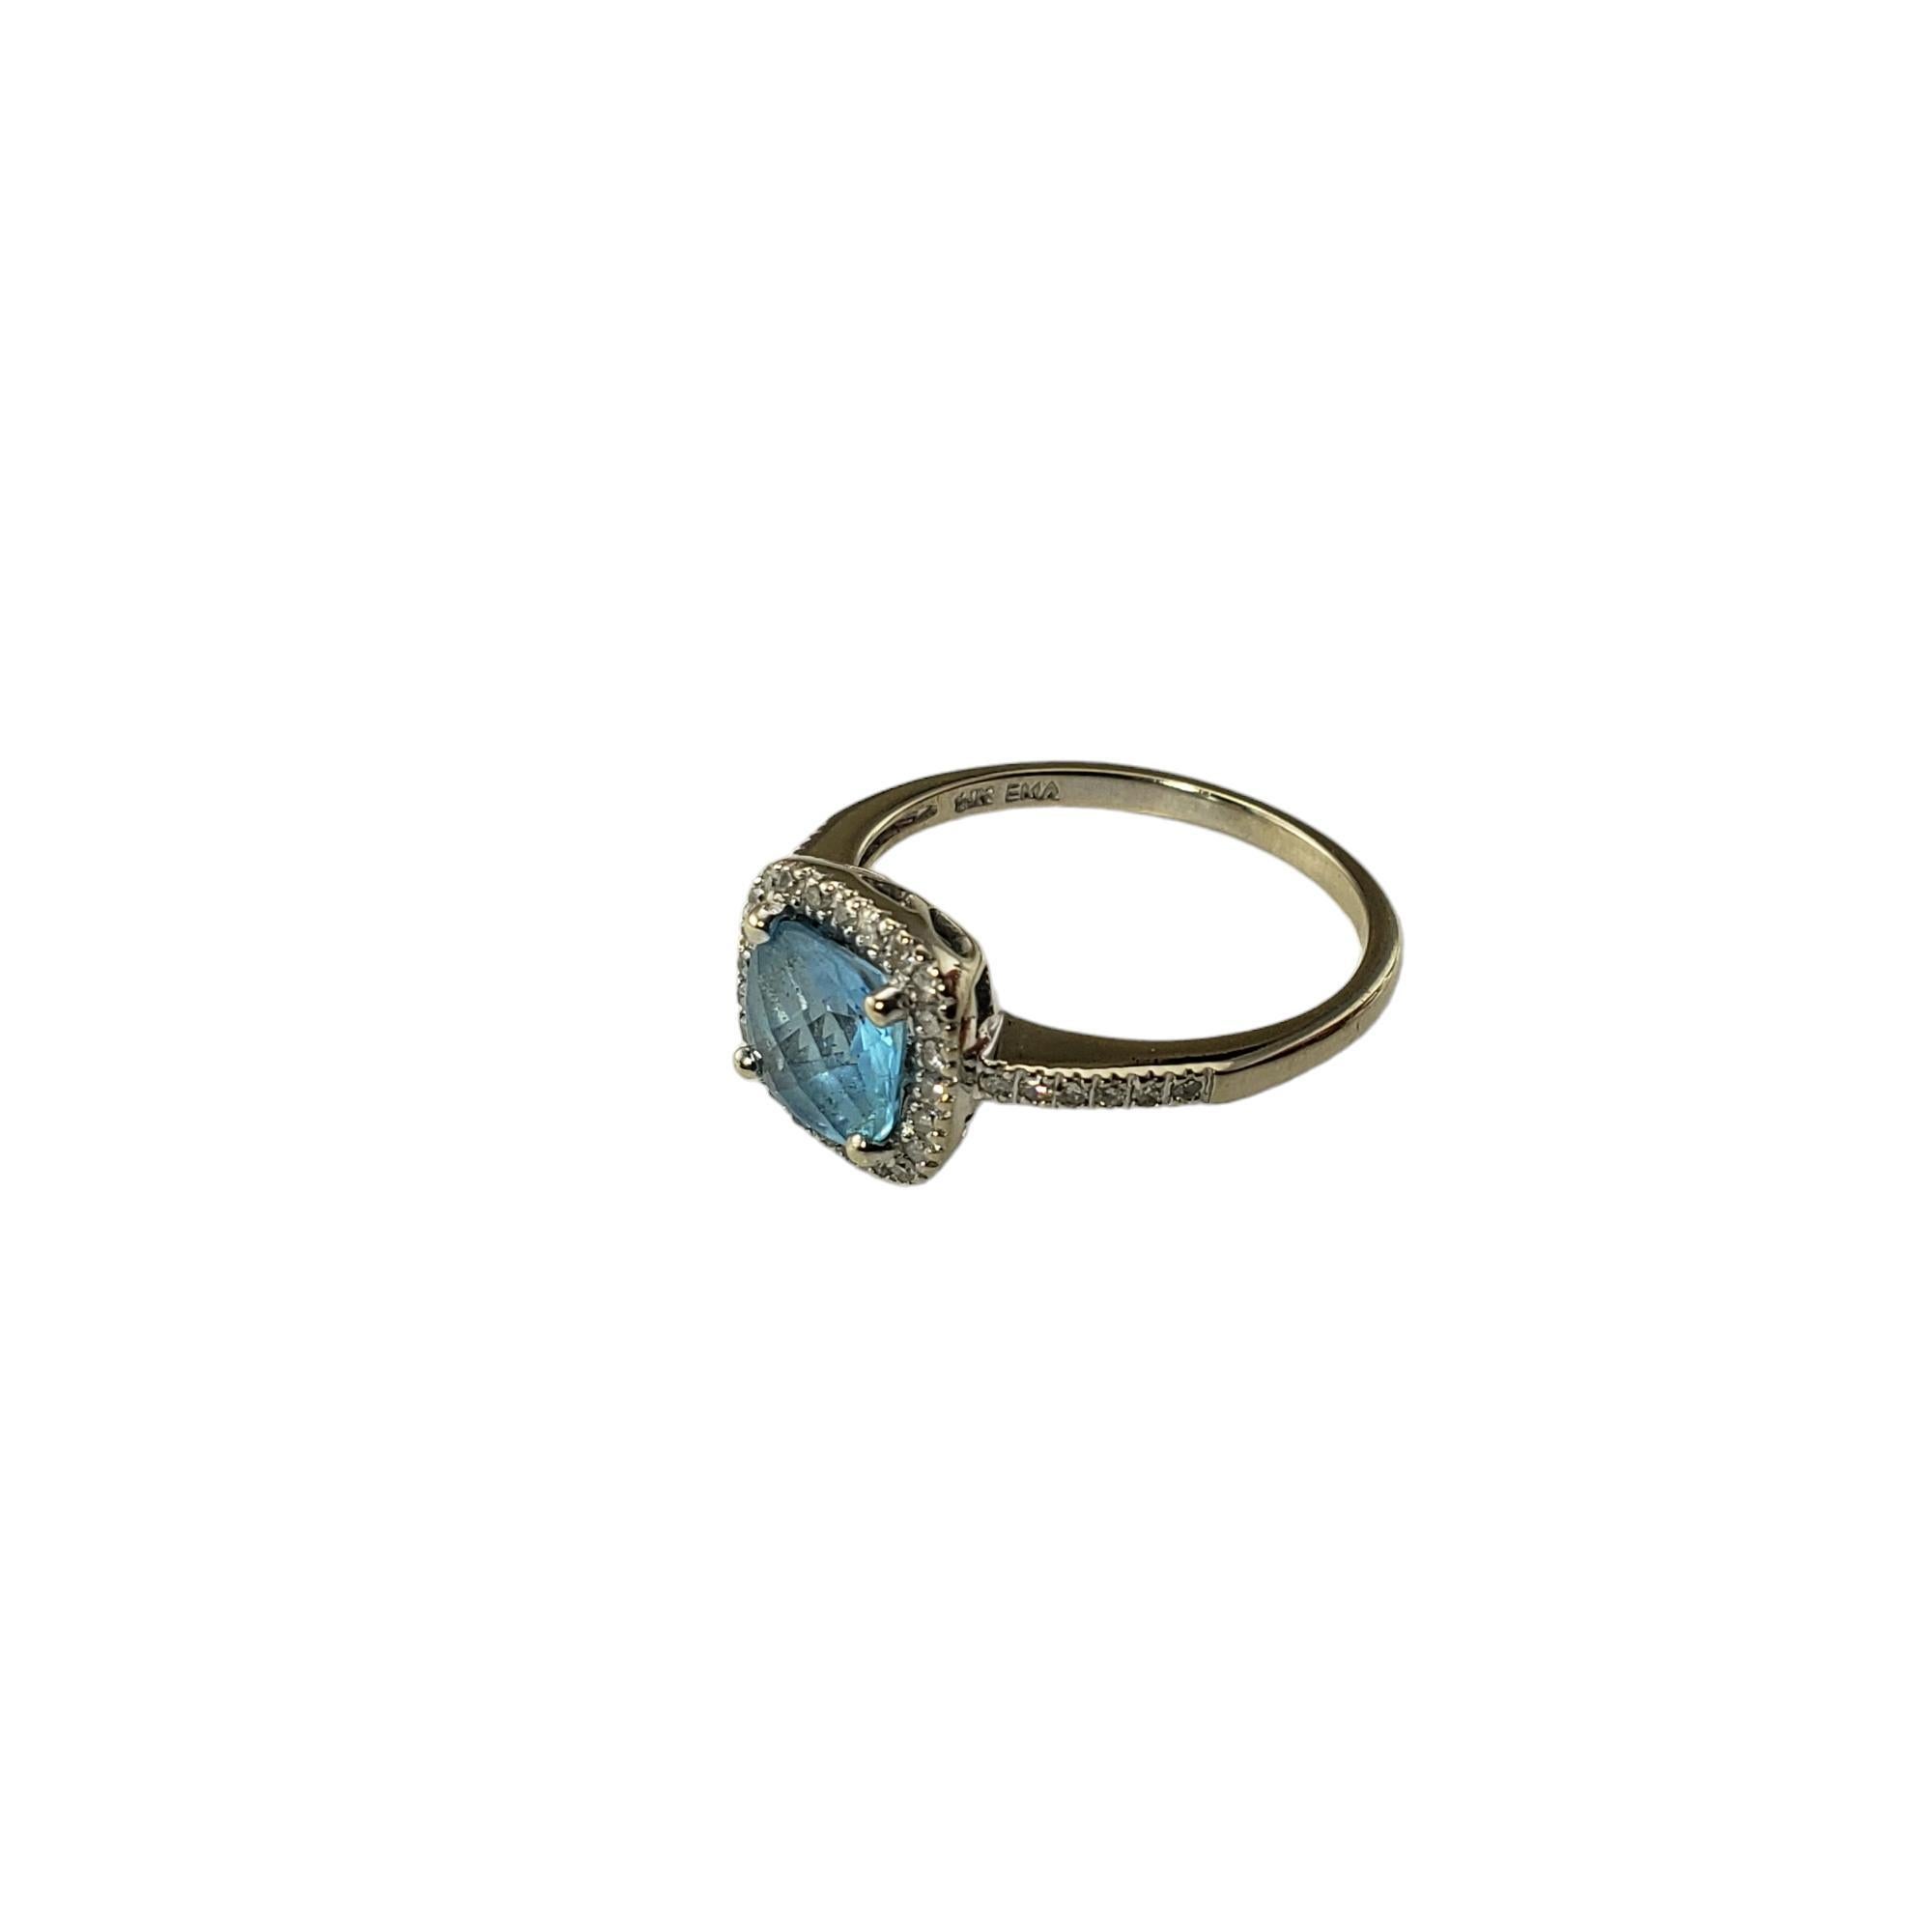 Vintage 14 Karat White Gold Blue Topaz and Diamond Ring size 7.25-

This stunning ring features one blue topaz stone (7 mm x 7 mm) surrounded by 36 round single cut diamonds set in classic 14K white gold.  Width:  9.8 mm.  Shank: 1.6